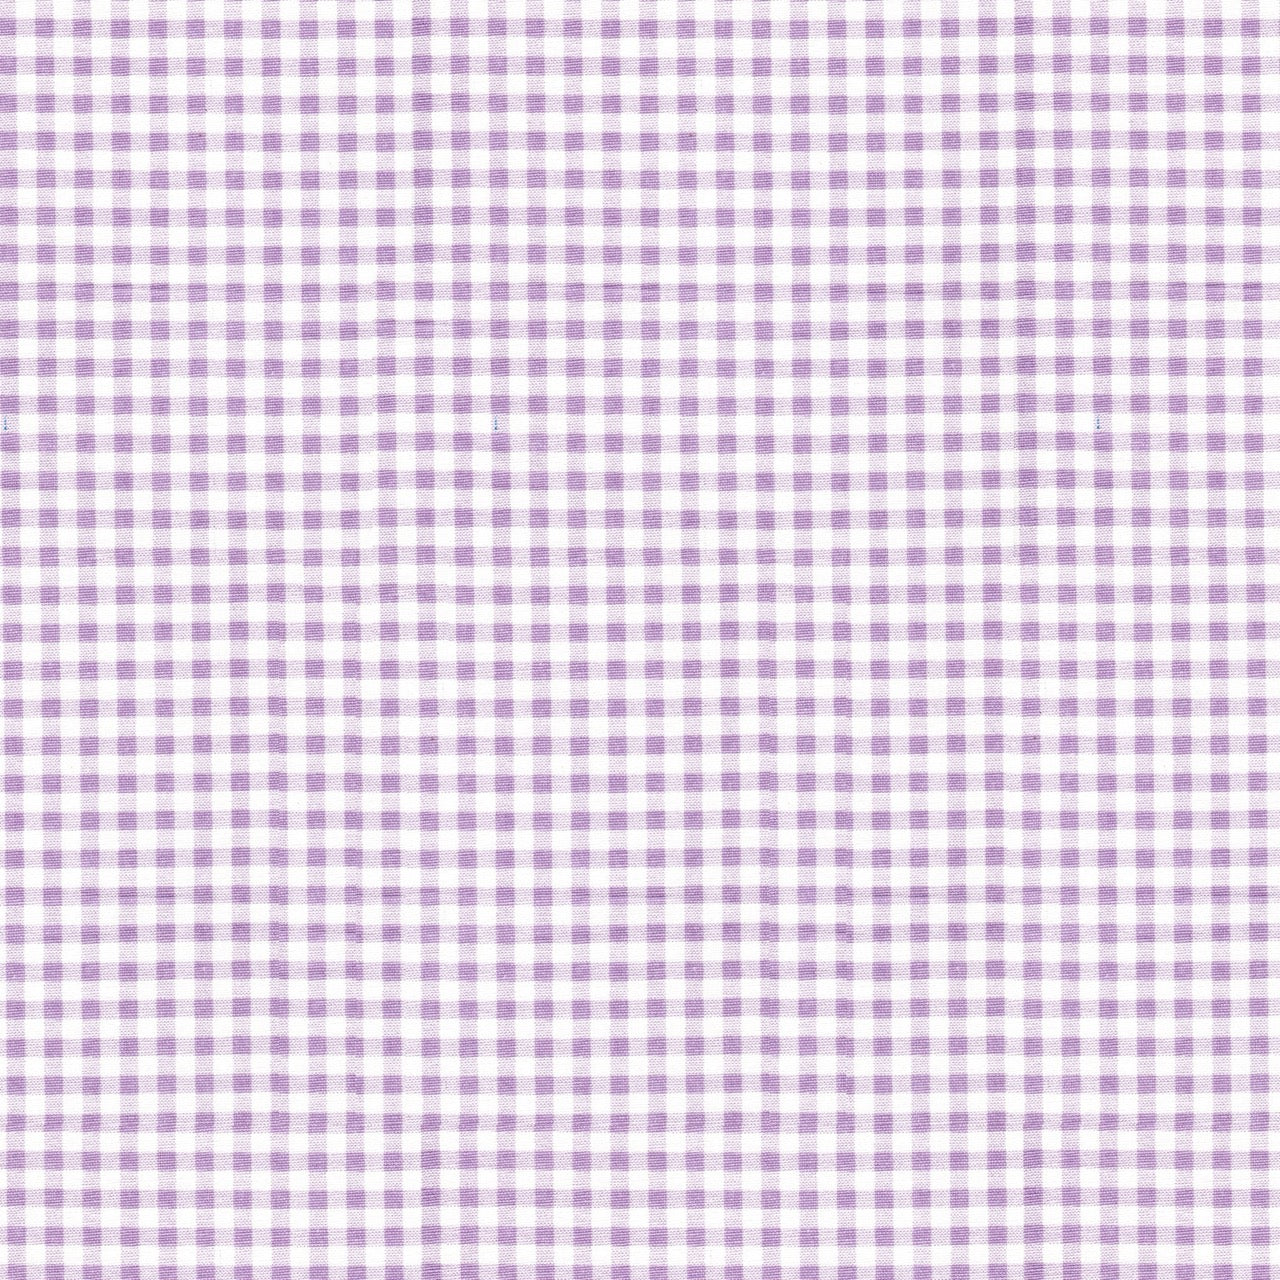 Shower Curtain in Orchid Large Gingham Check on White